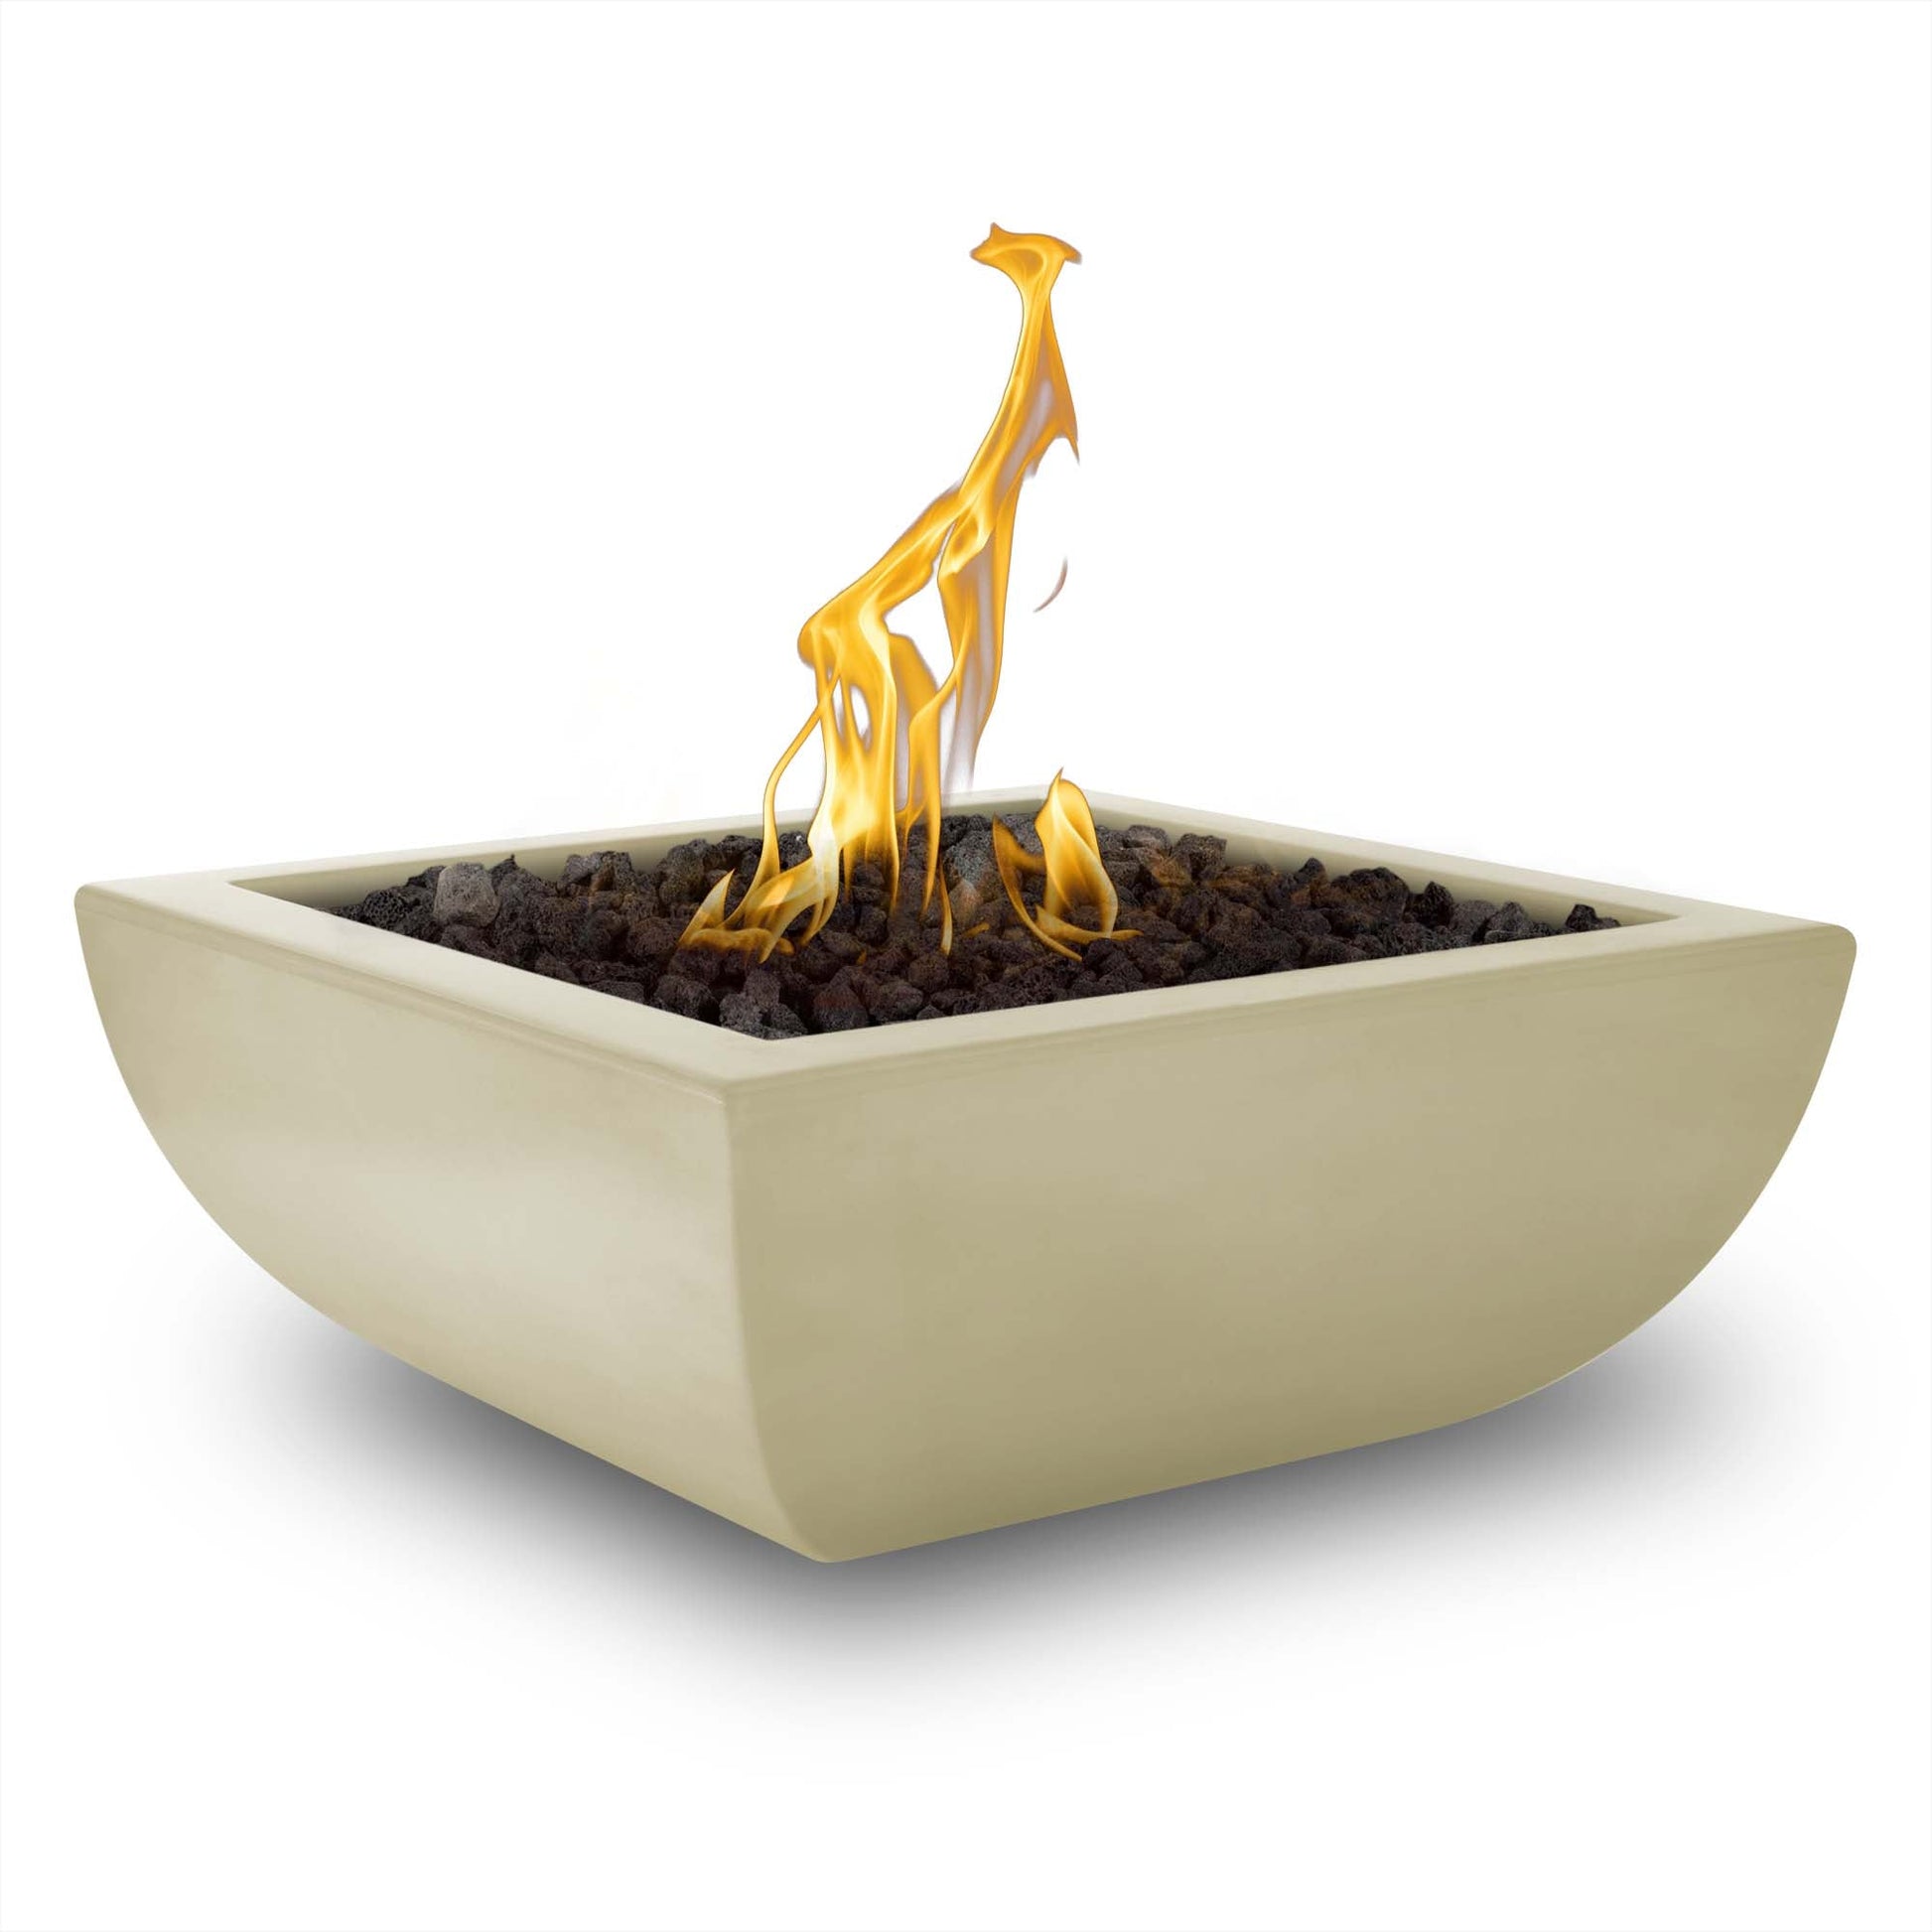 The Outdoor Plus Square Avalon 24" Metallic Bronze GFRC Concrete Natural Gas Fire Bowl with Match Lit with Flame Sense Ignition